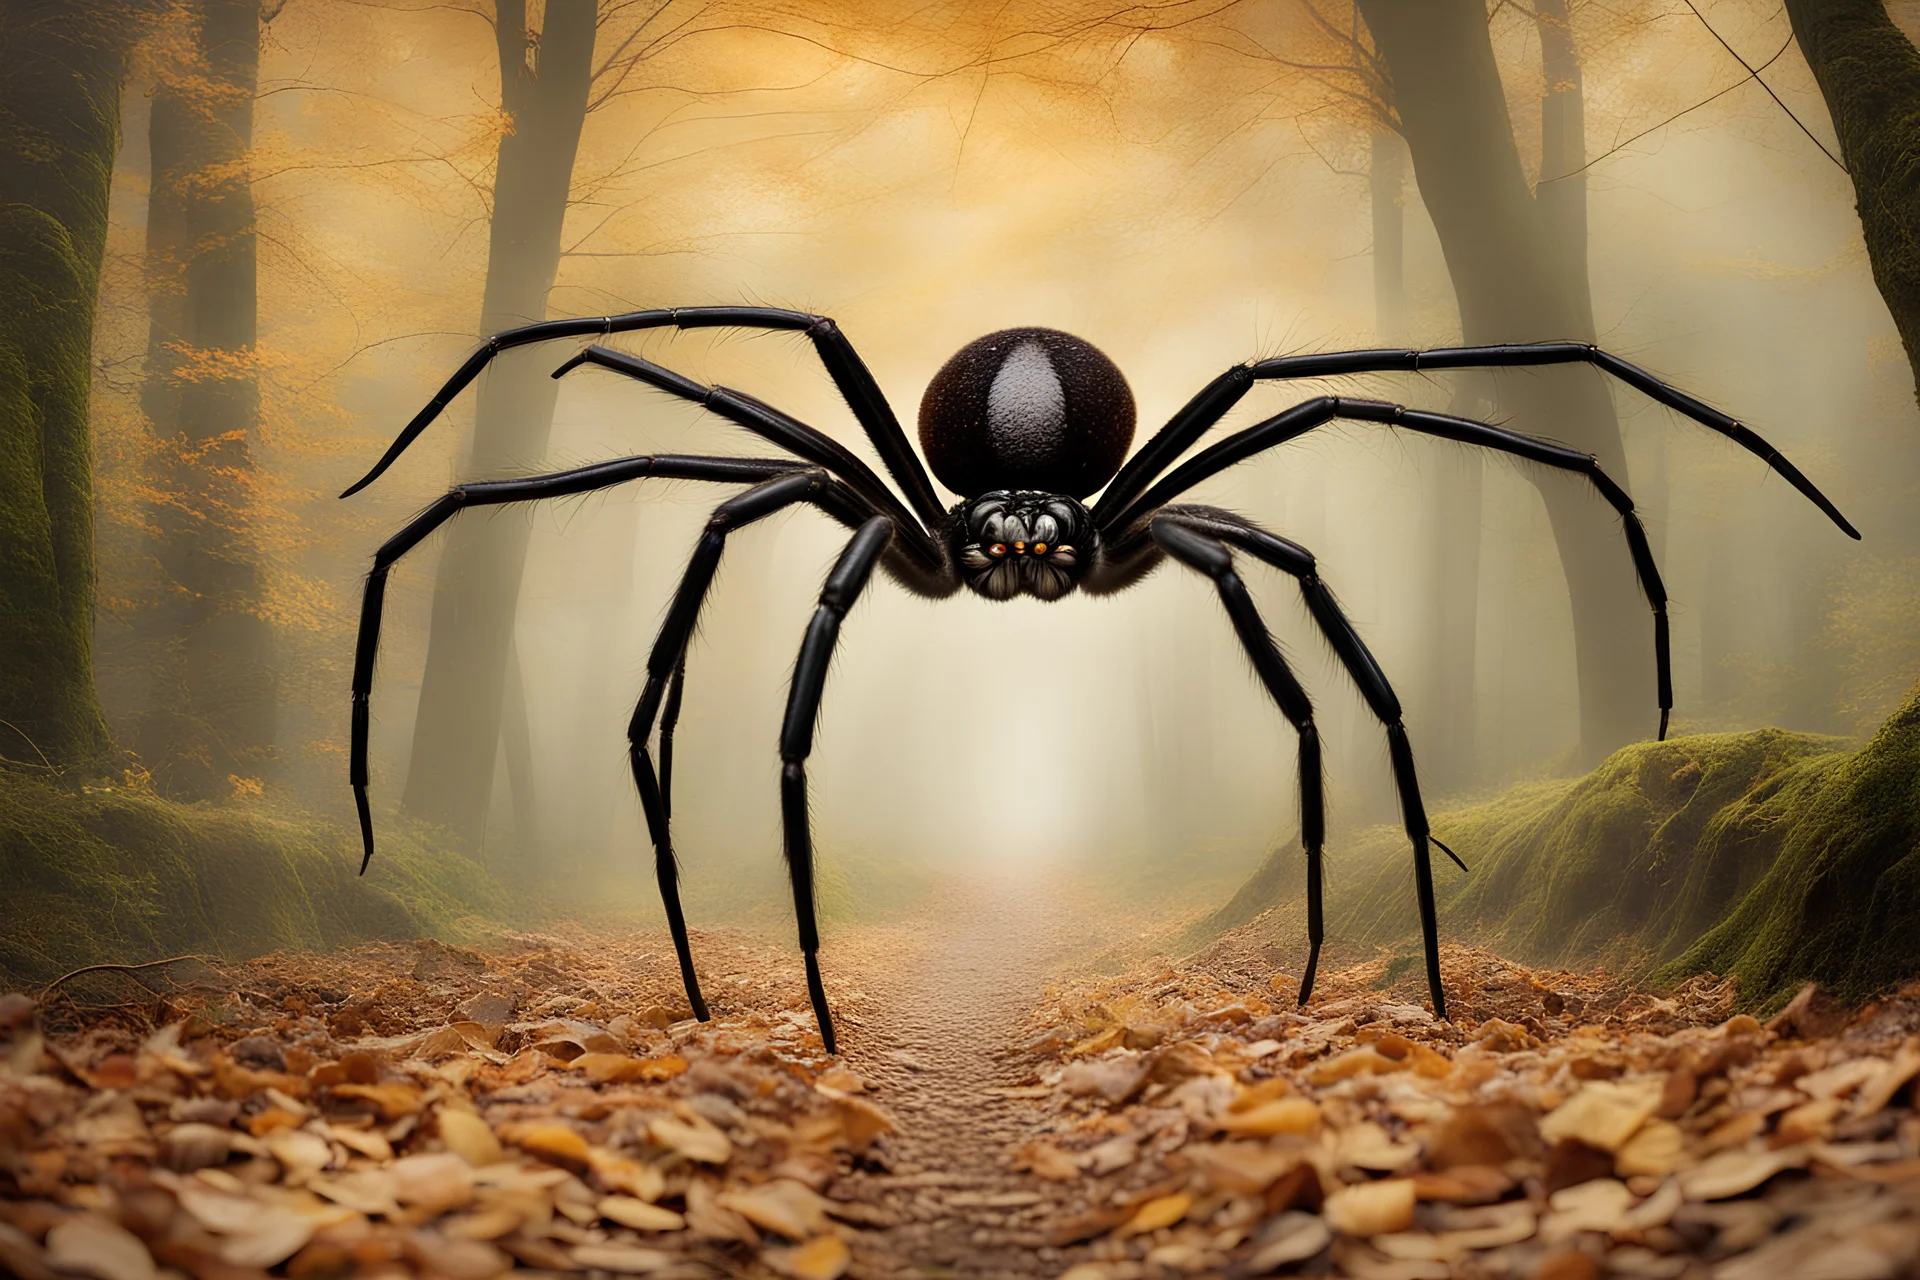 Captivating viewers with a touch of arachnid mystery, capture a realistic professional and marketing photoshoot featuring a majestic spider on a winding woodland path.